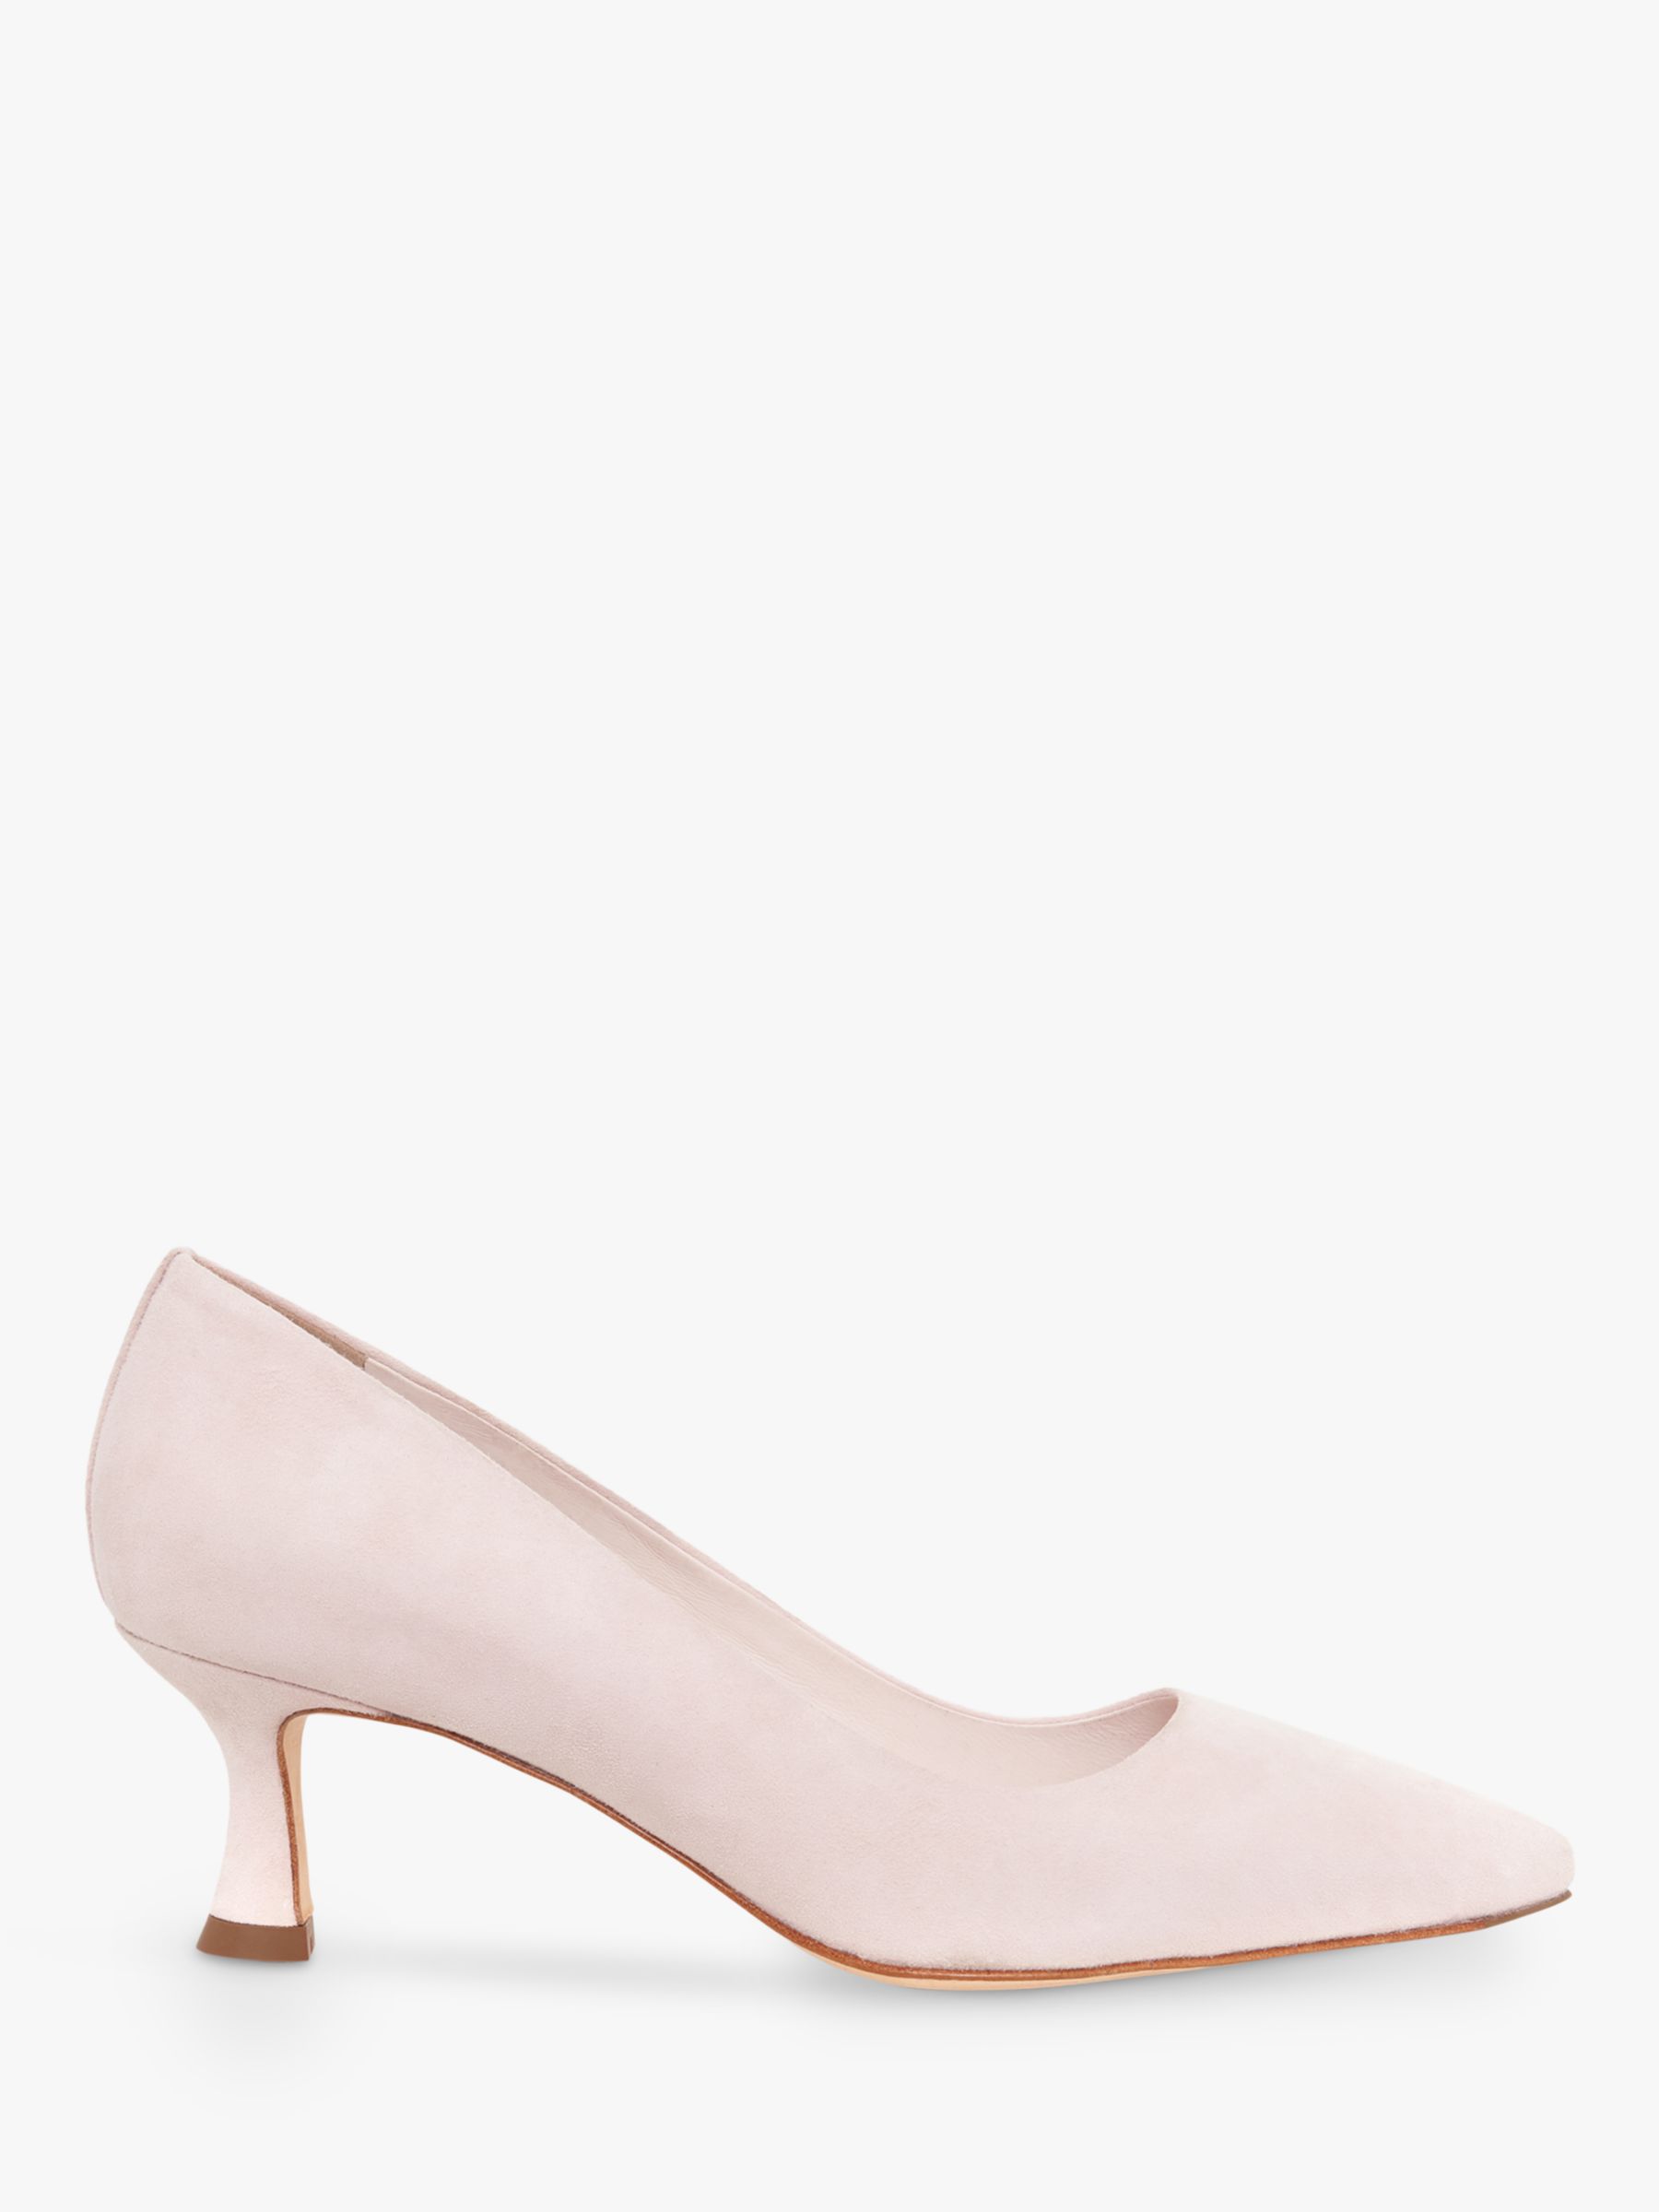 Hobbs Esther Suede Court Shoes, Pale Pink at John Lewis & Partners